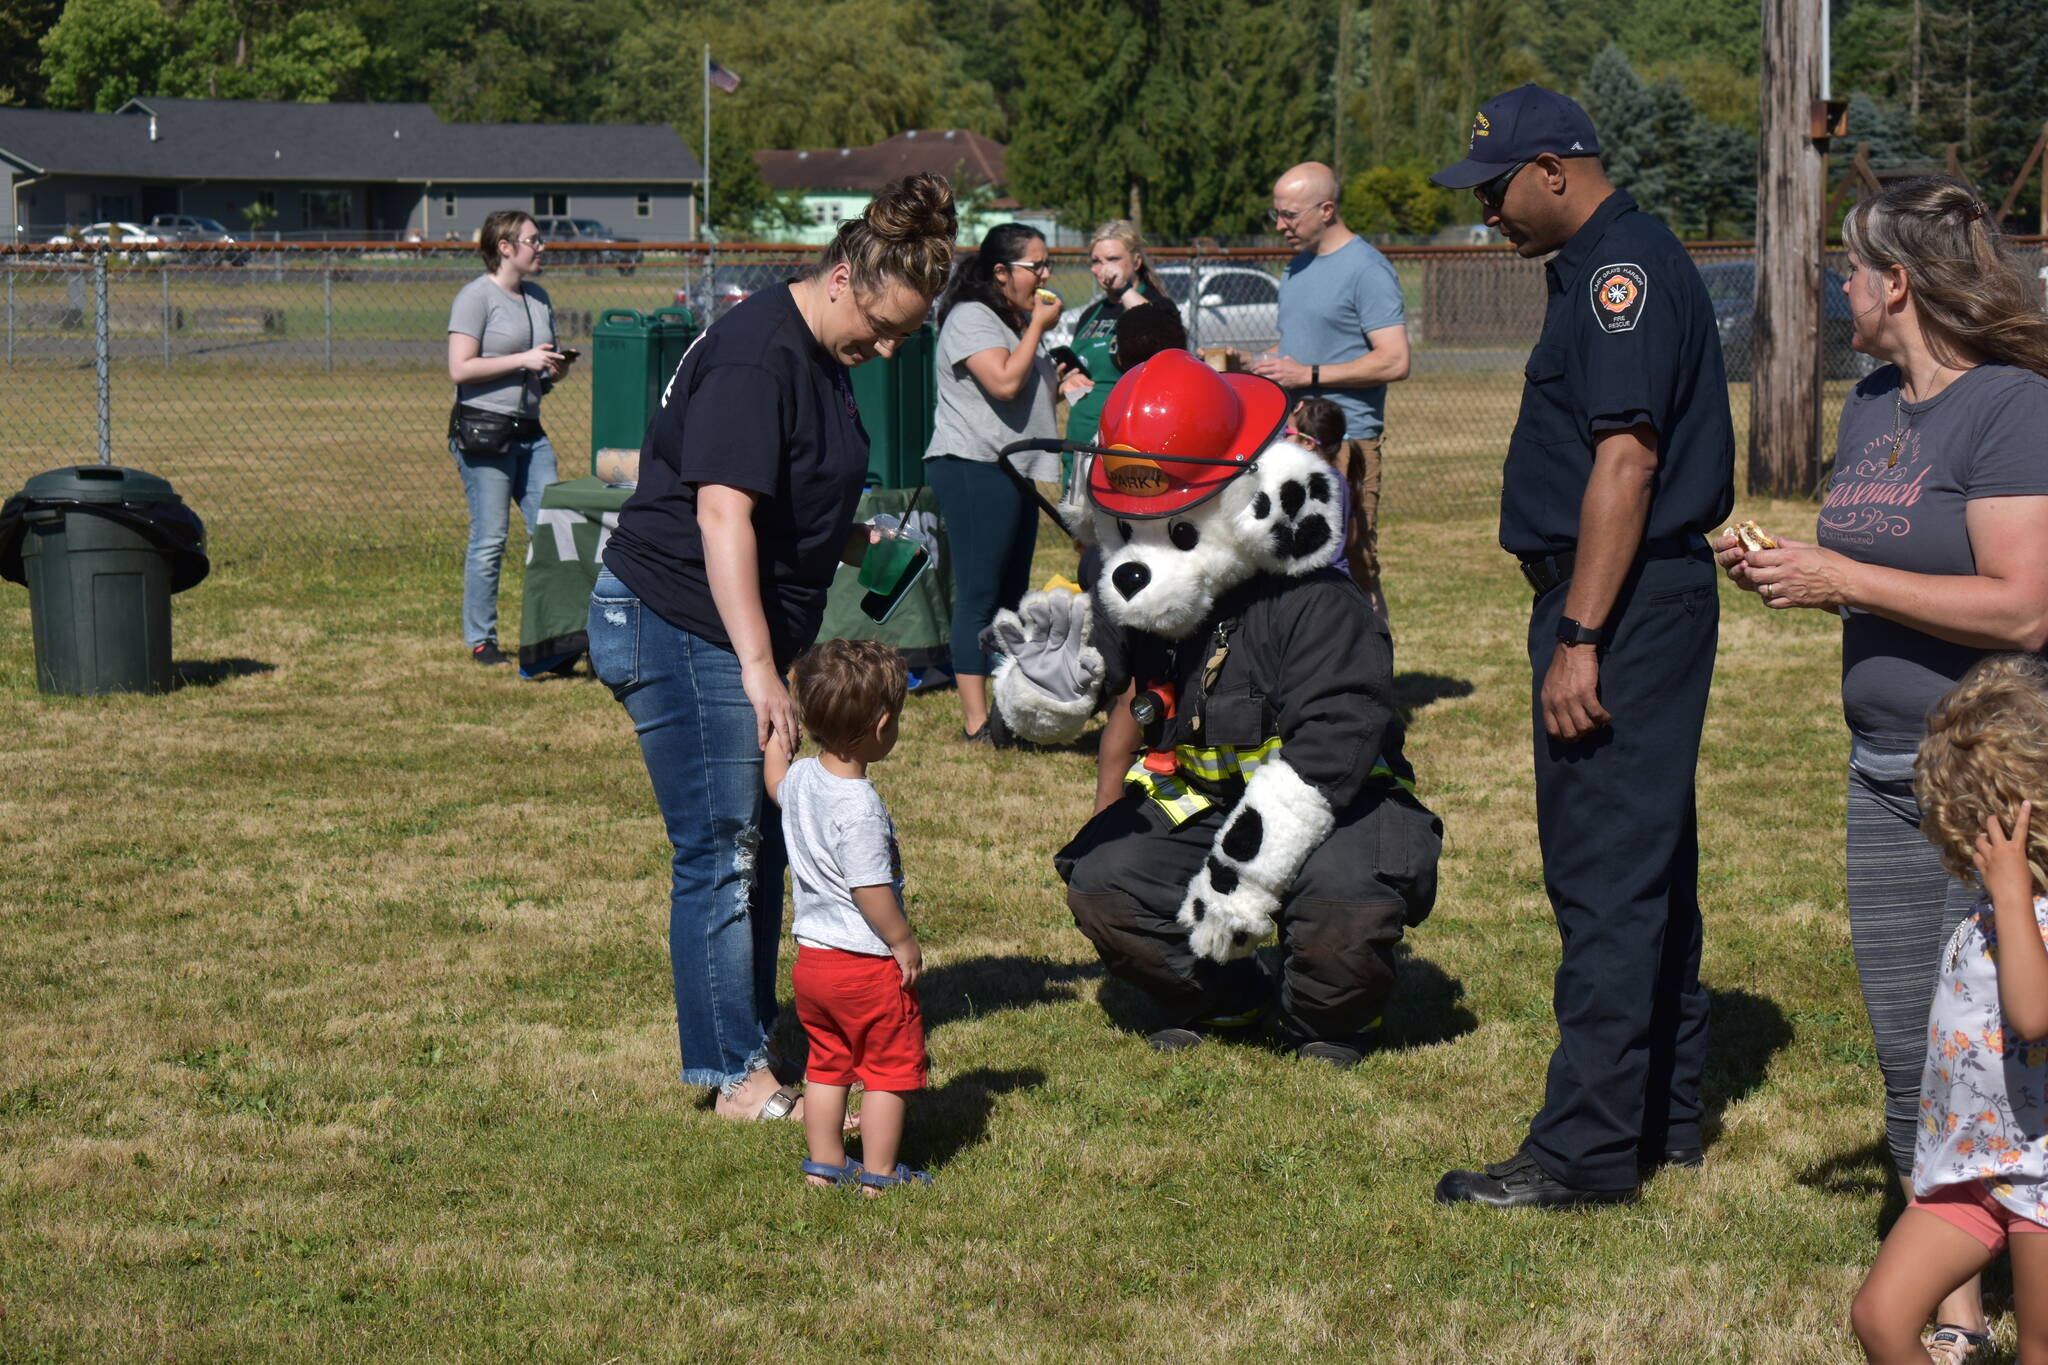 Kids attending the National Night Out festivities in Elma were greeted by Sparky, the East Grays Harbor Fire and Rescue Mascot. Sparky showed kids around the parked firetrucks and let them hold hoses and gear. (Allen Leister | The Daily World)